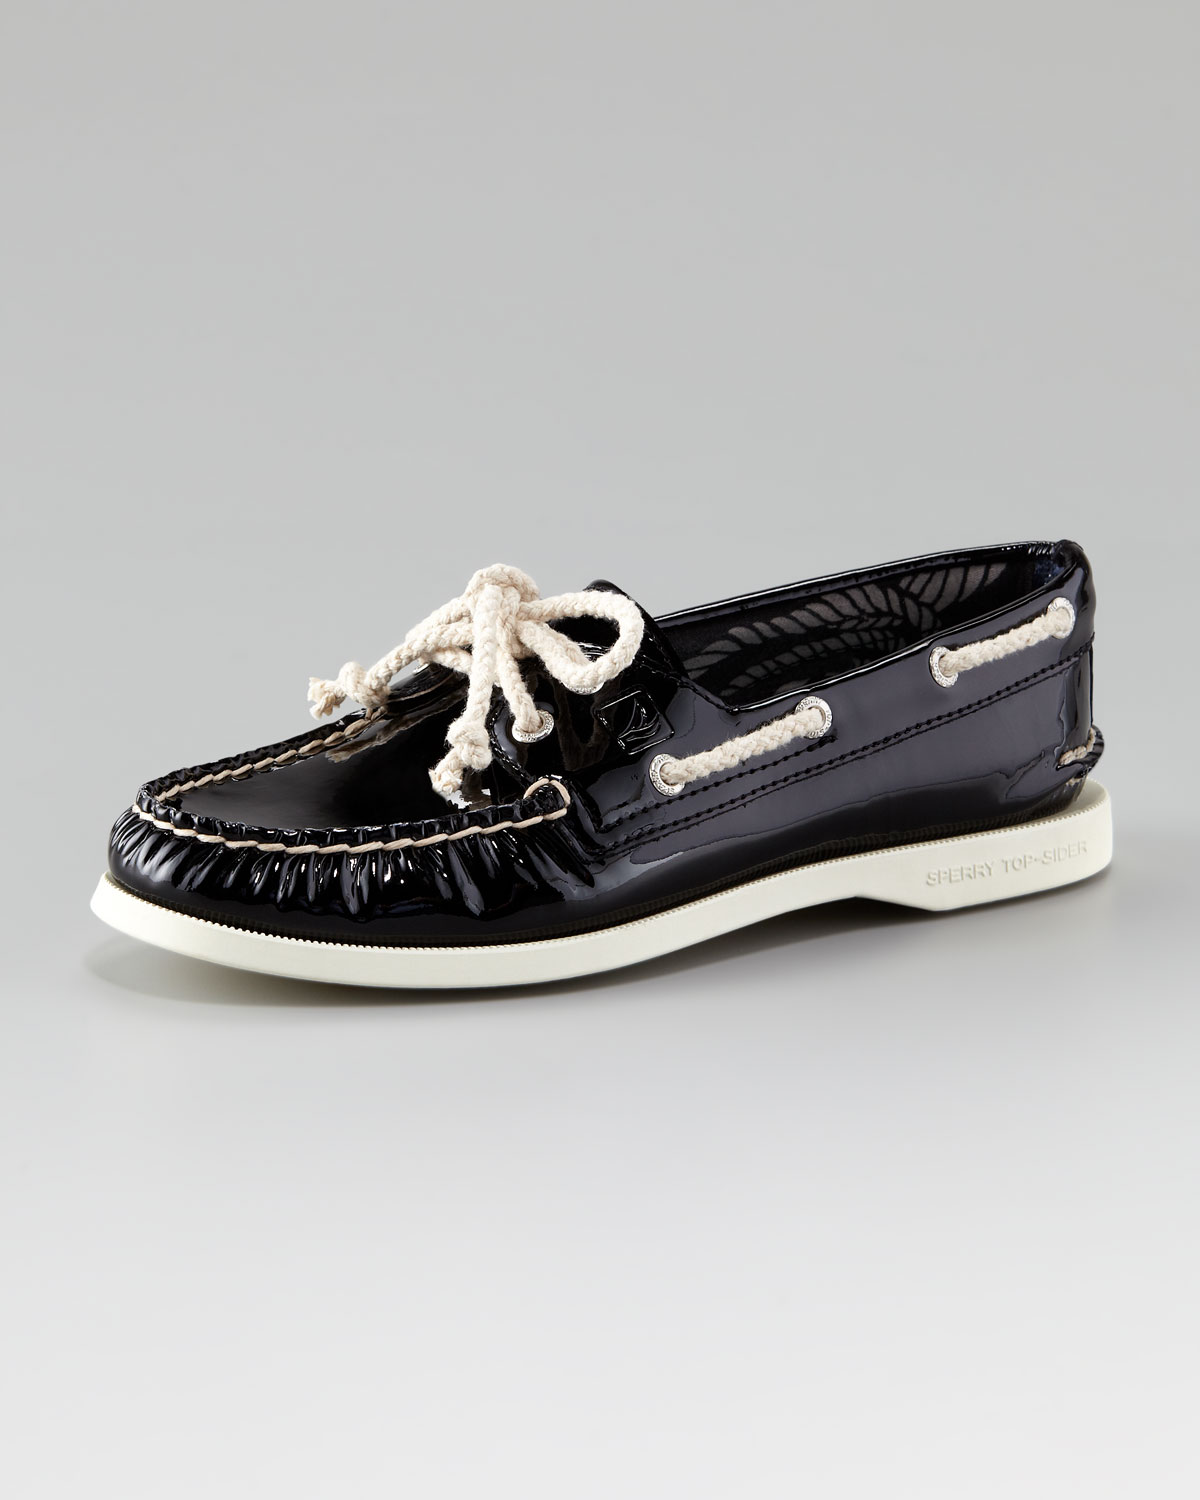 Lyst - Sperry Top-Sider Authentic Patent Leather Boat Shoe in Black